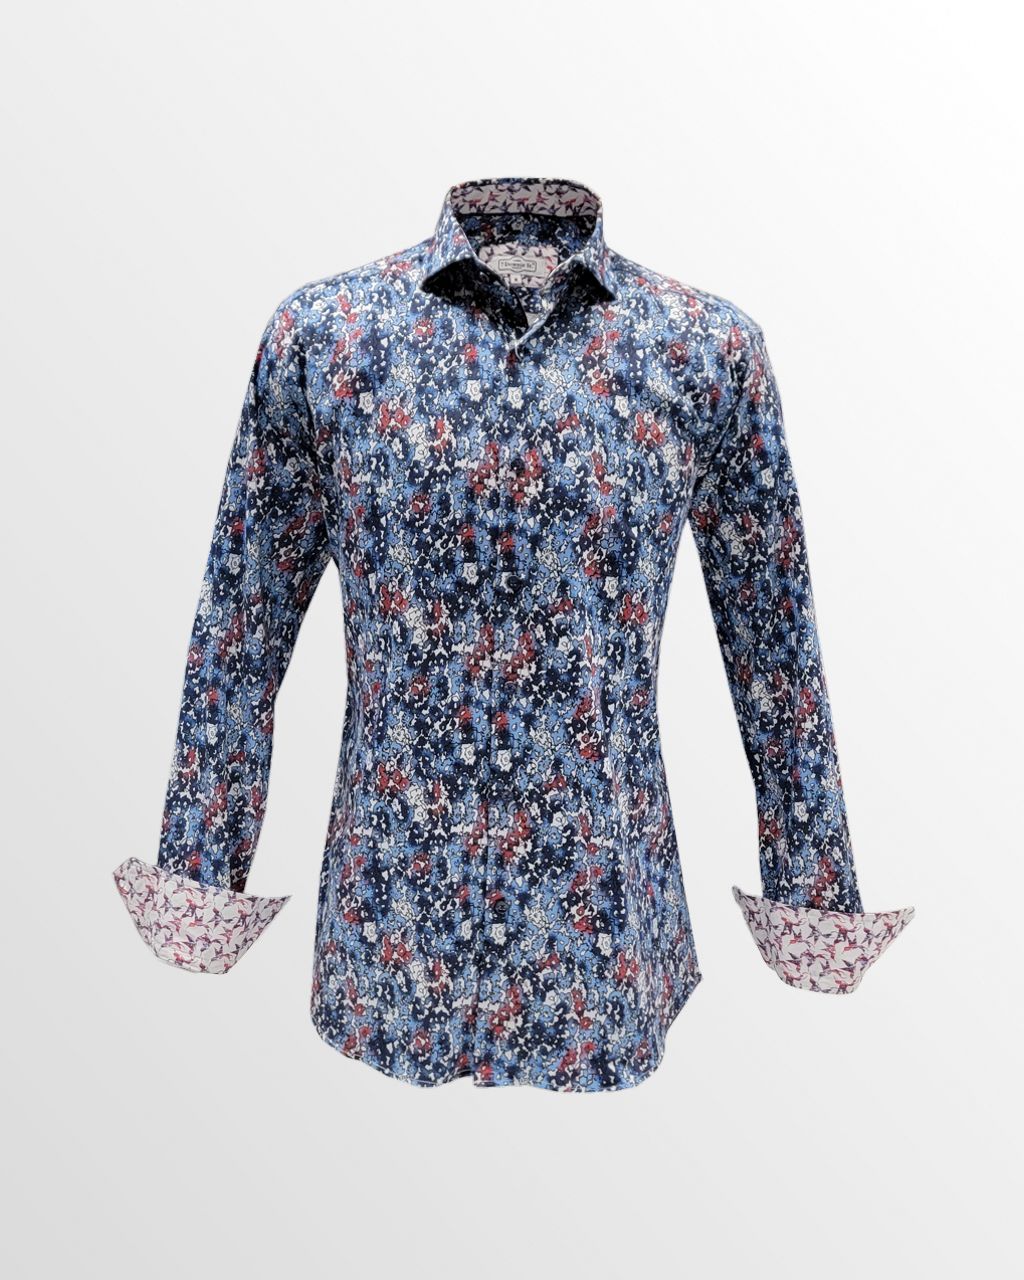 7 Downie St. Long Sleeve Sport Shirt in Red/White/Blue Abstract Floral Pattern